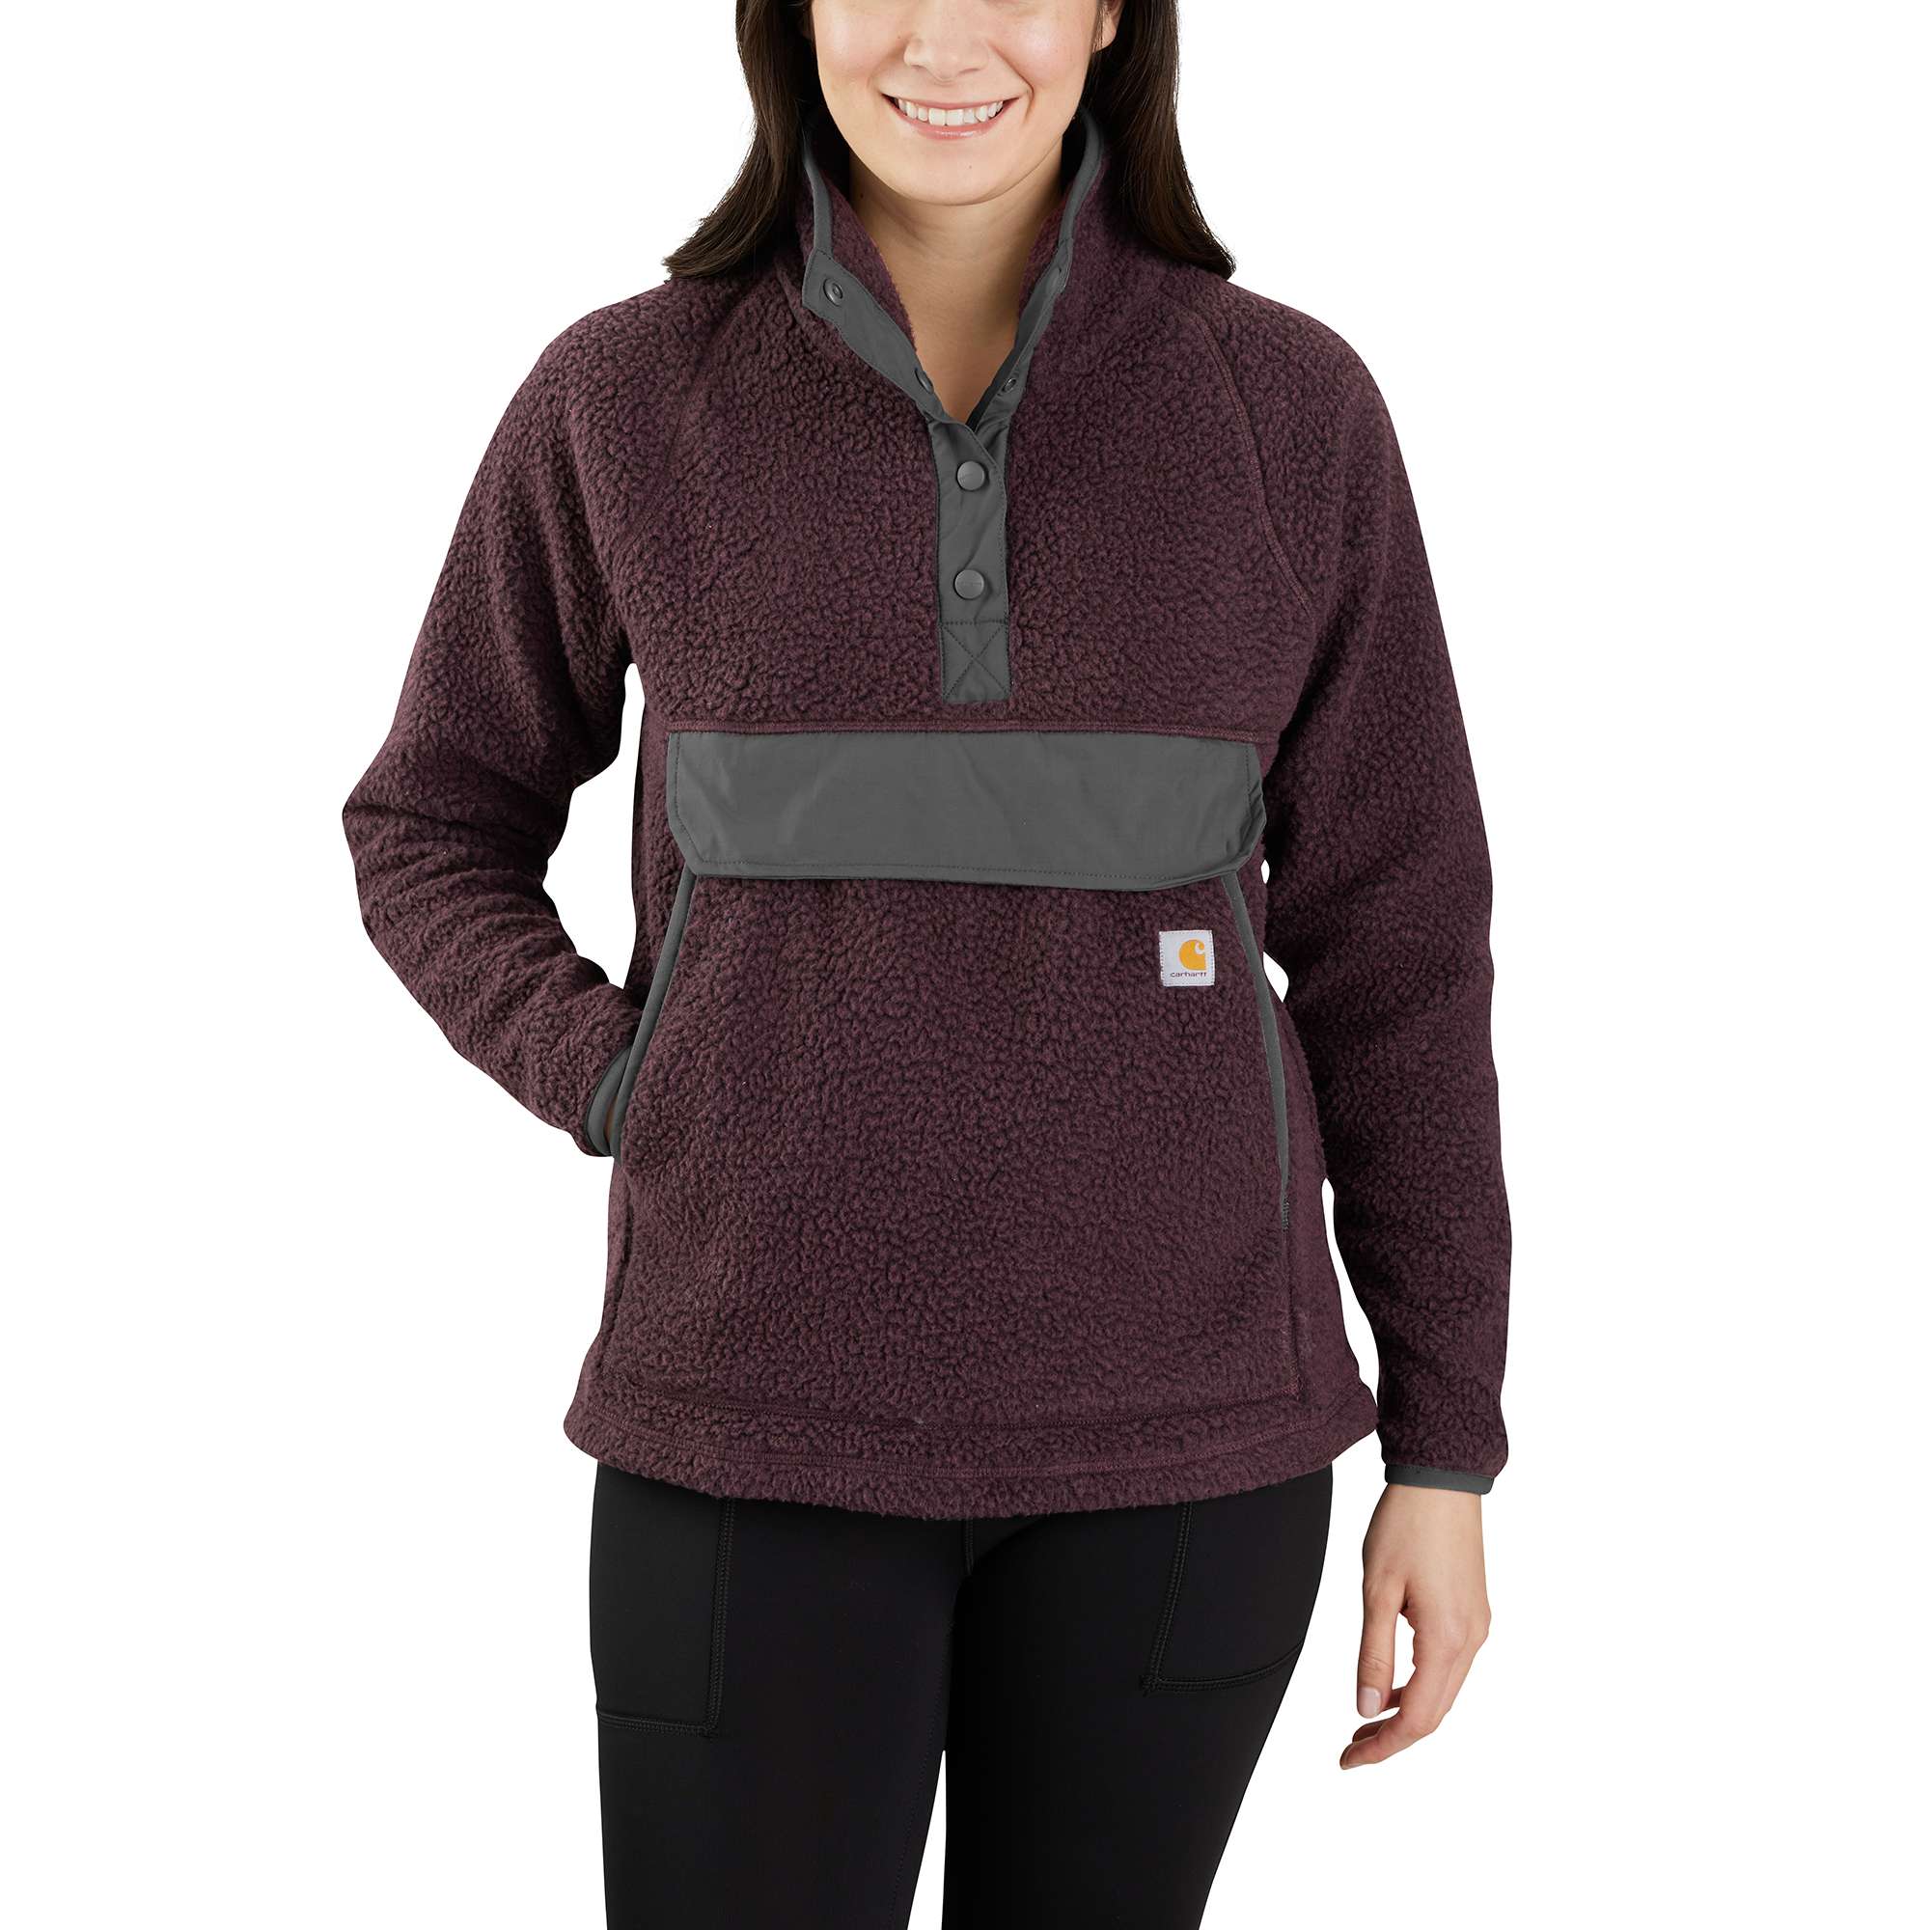 Up To 79% Off on Women's Loose Fit Fleece-Line